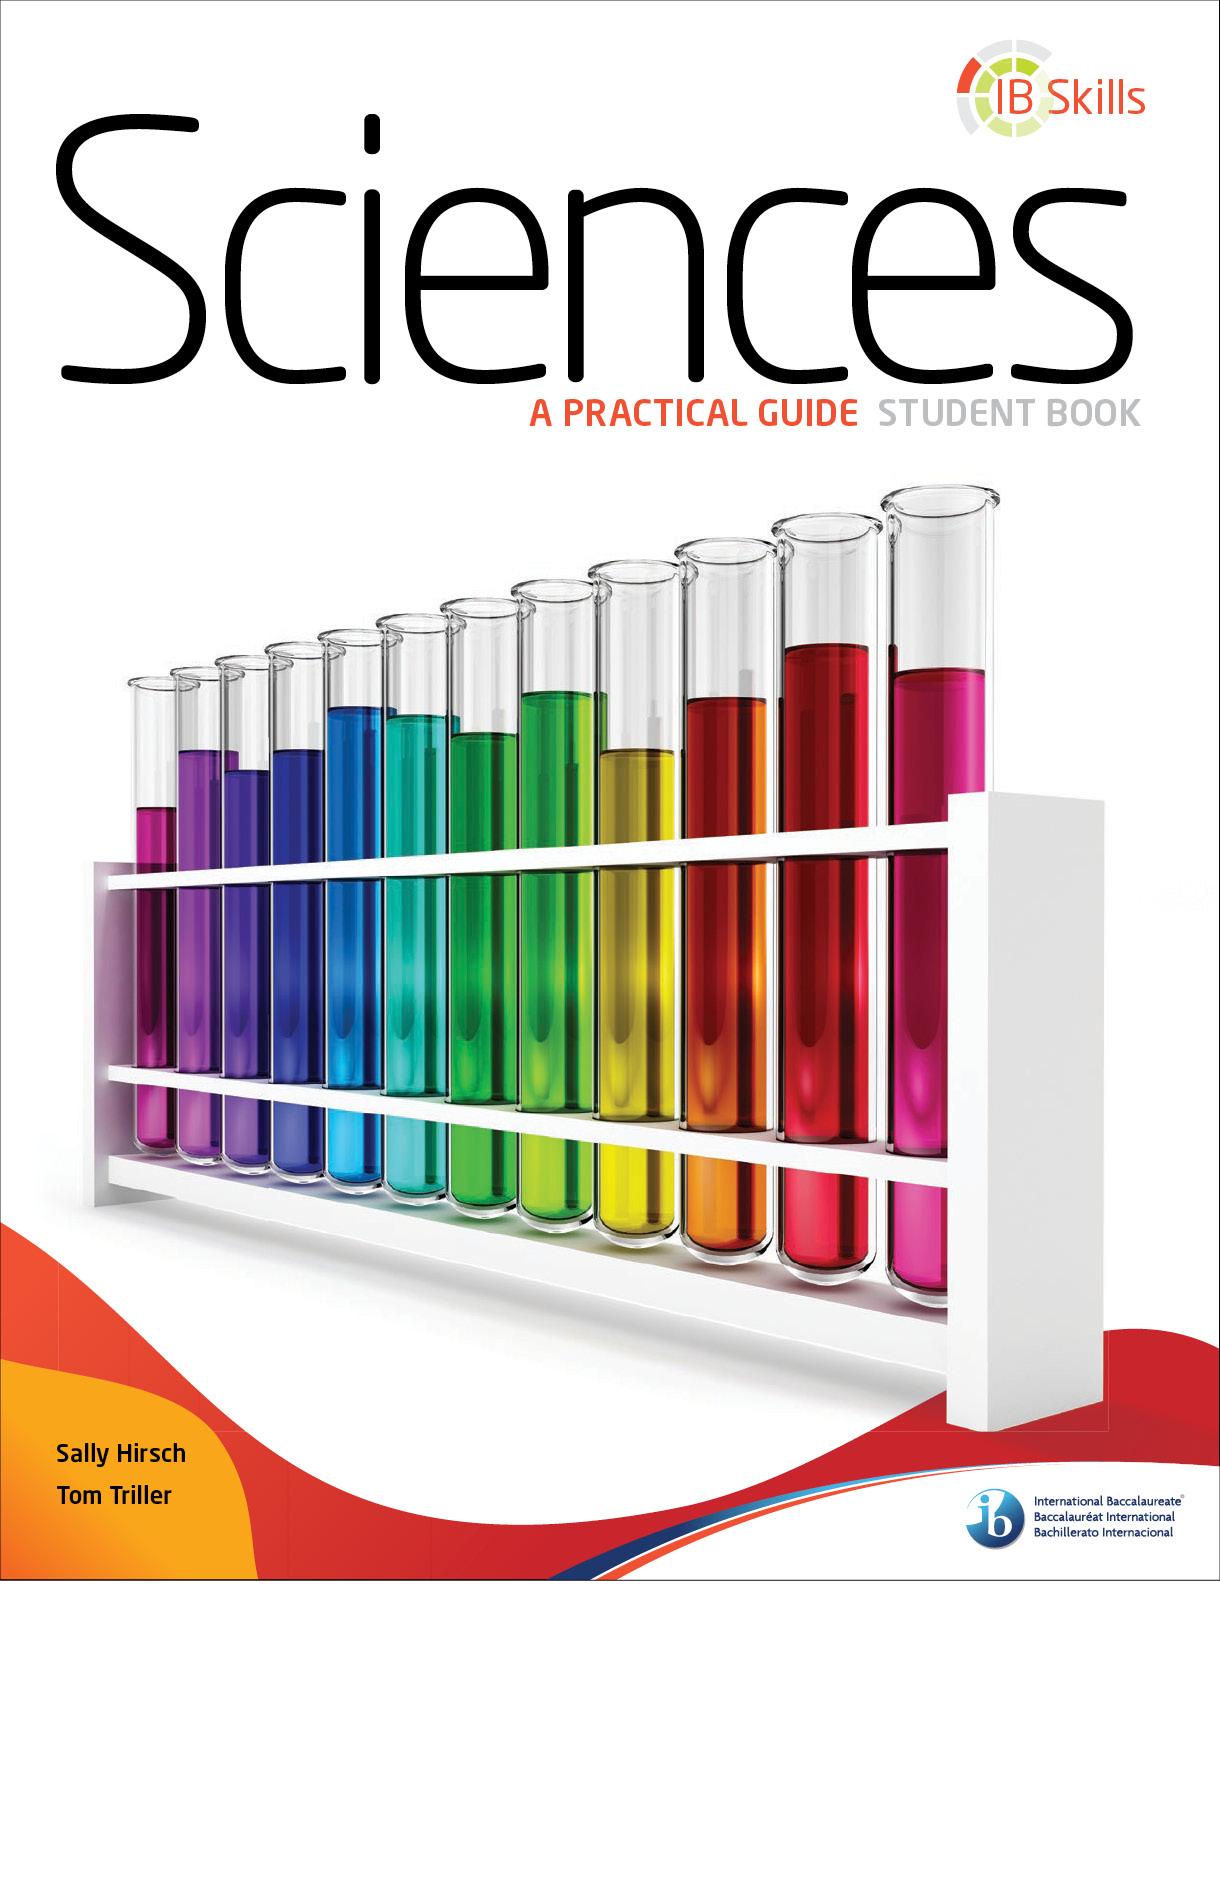 Book cover for International Baccalaureate's Sciences, A Practical Guide student book. It has test tubes in a rack with various colored liquid in them.